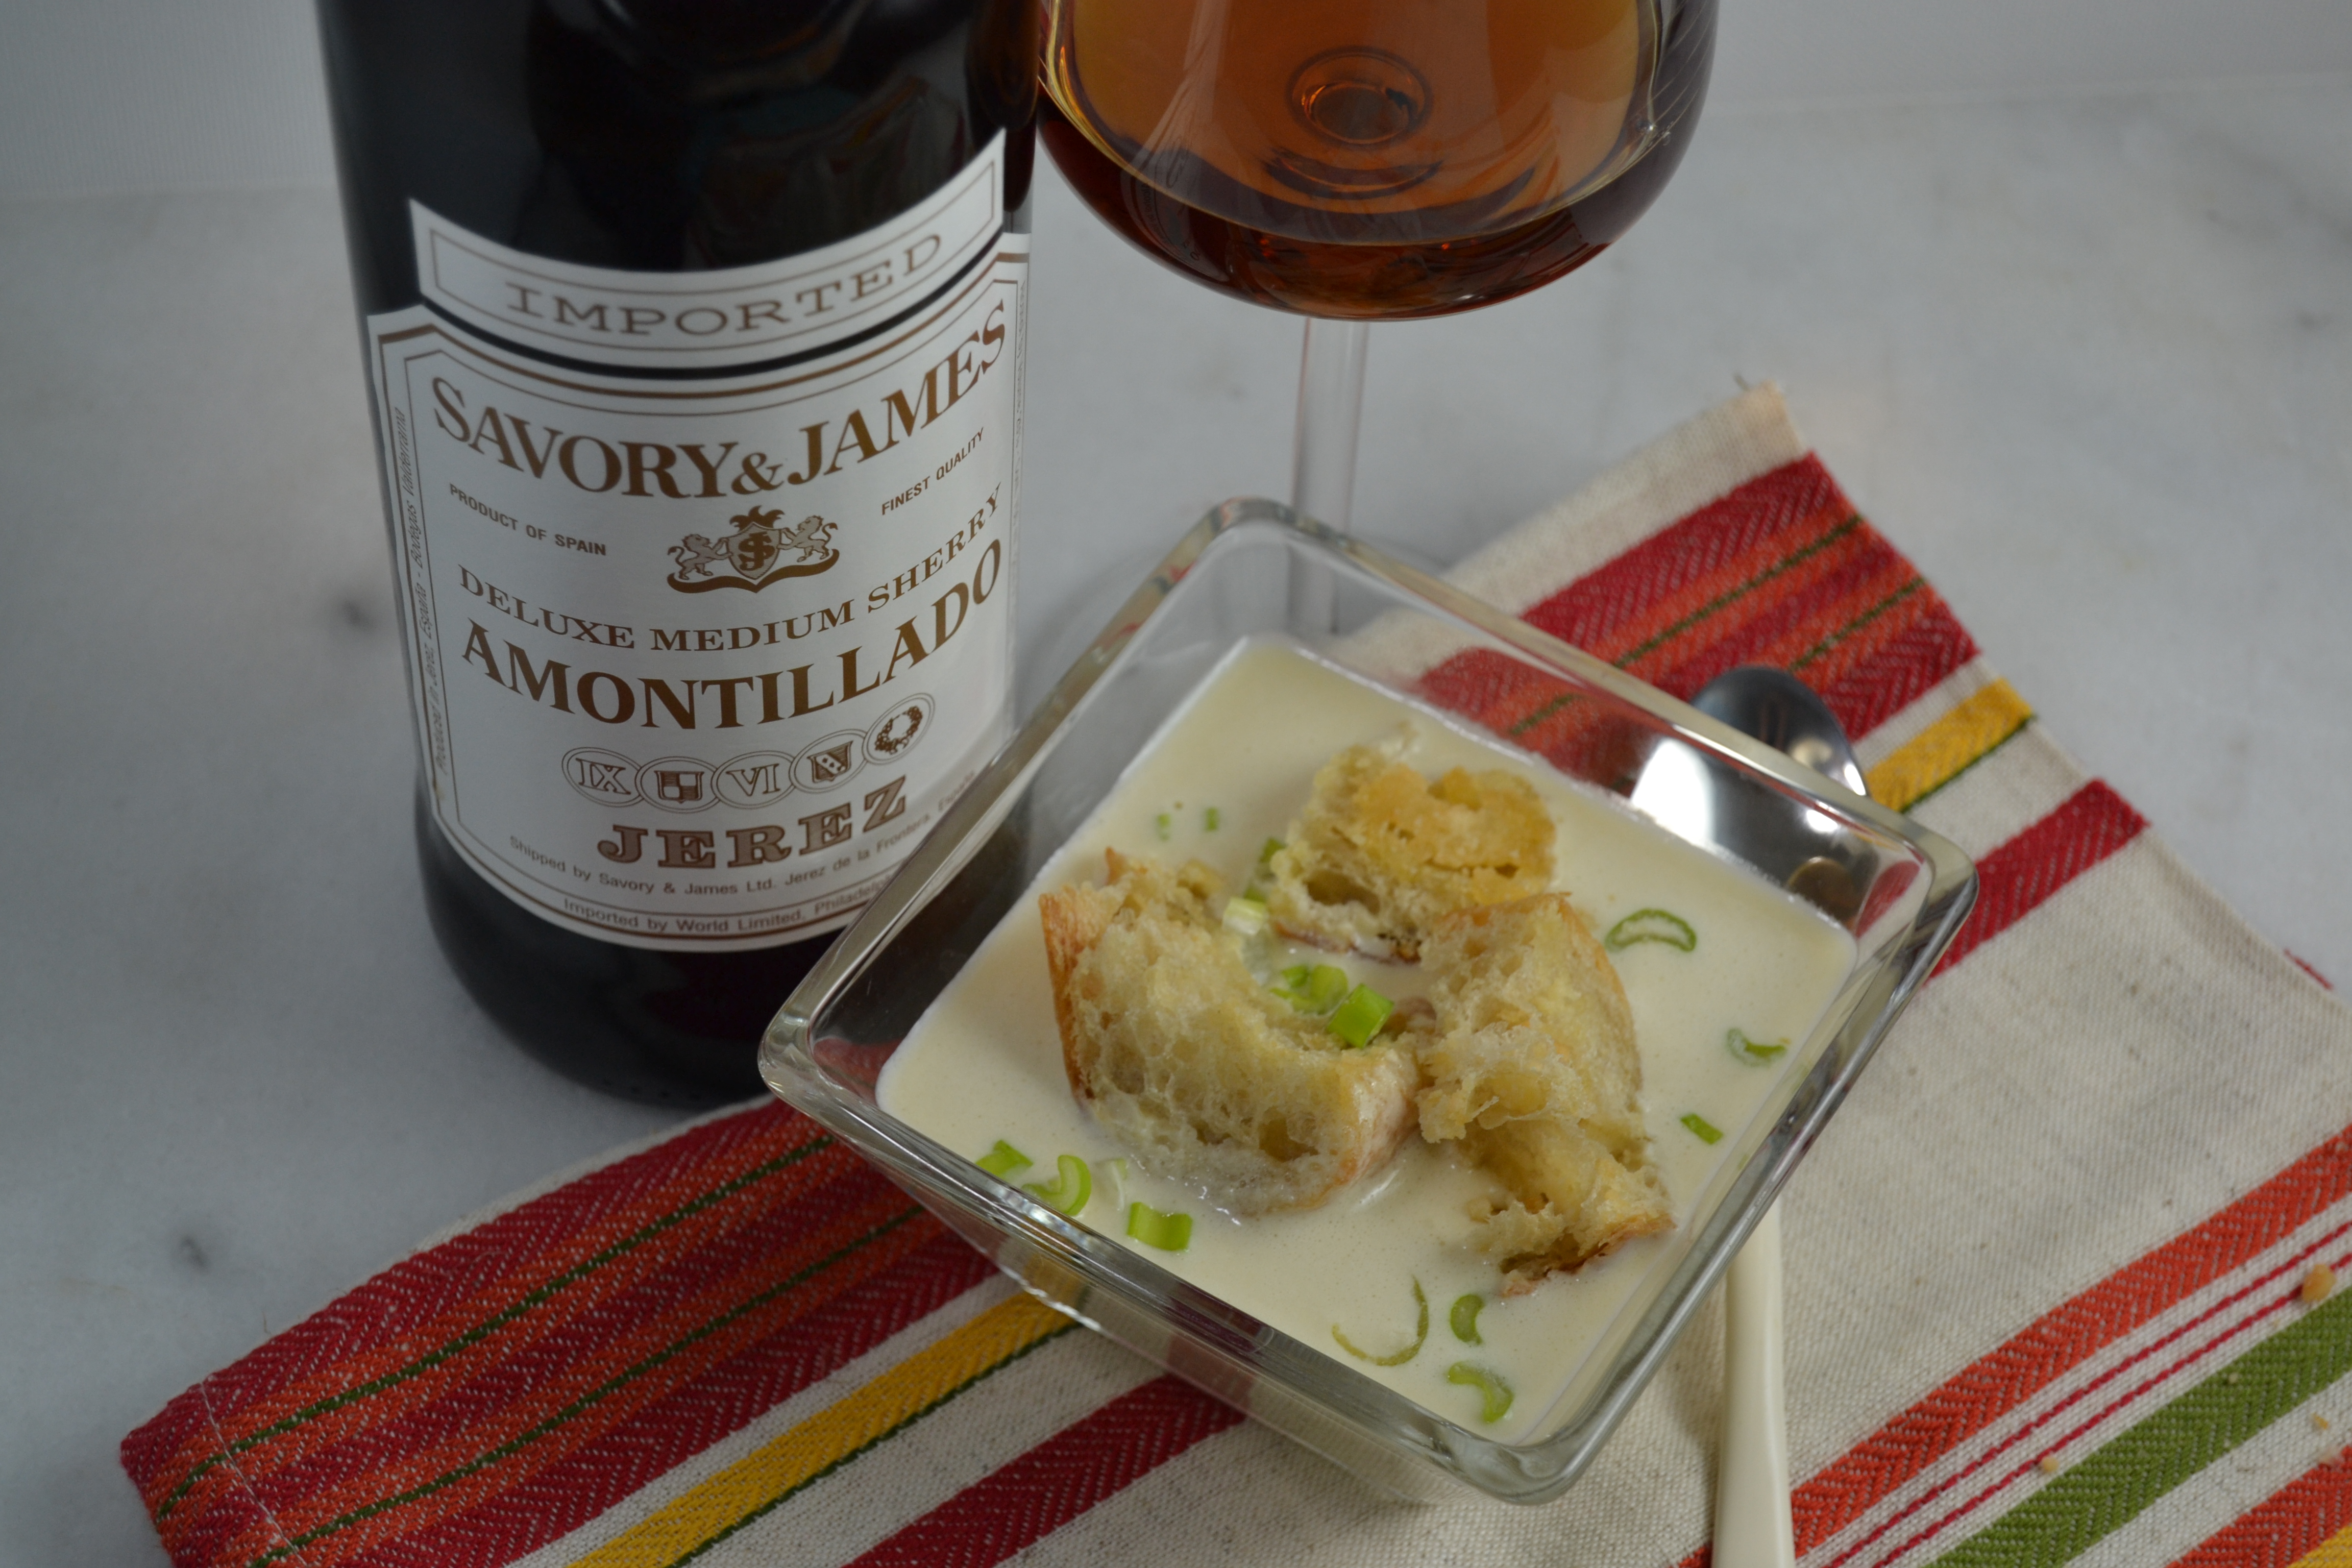 The French #Winophiles – Banking on Bordeaux